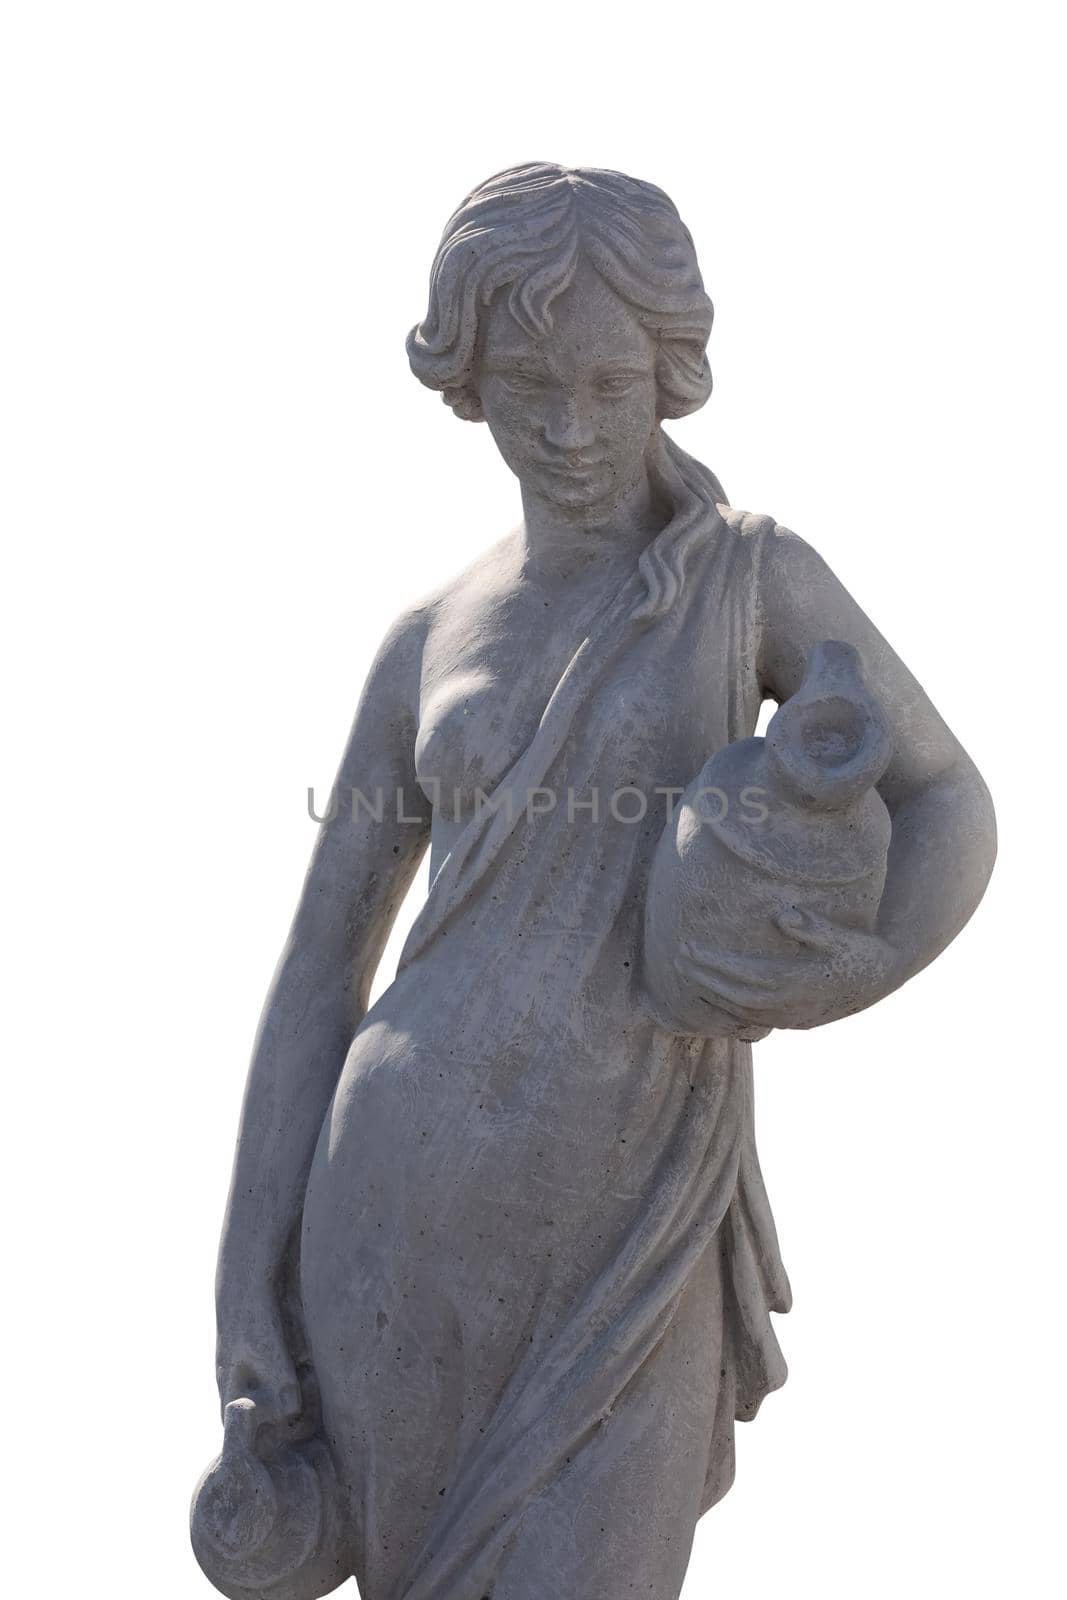 Stone sculpture of woman looking down holding vase on white background by Wavebreakmedia